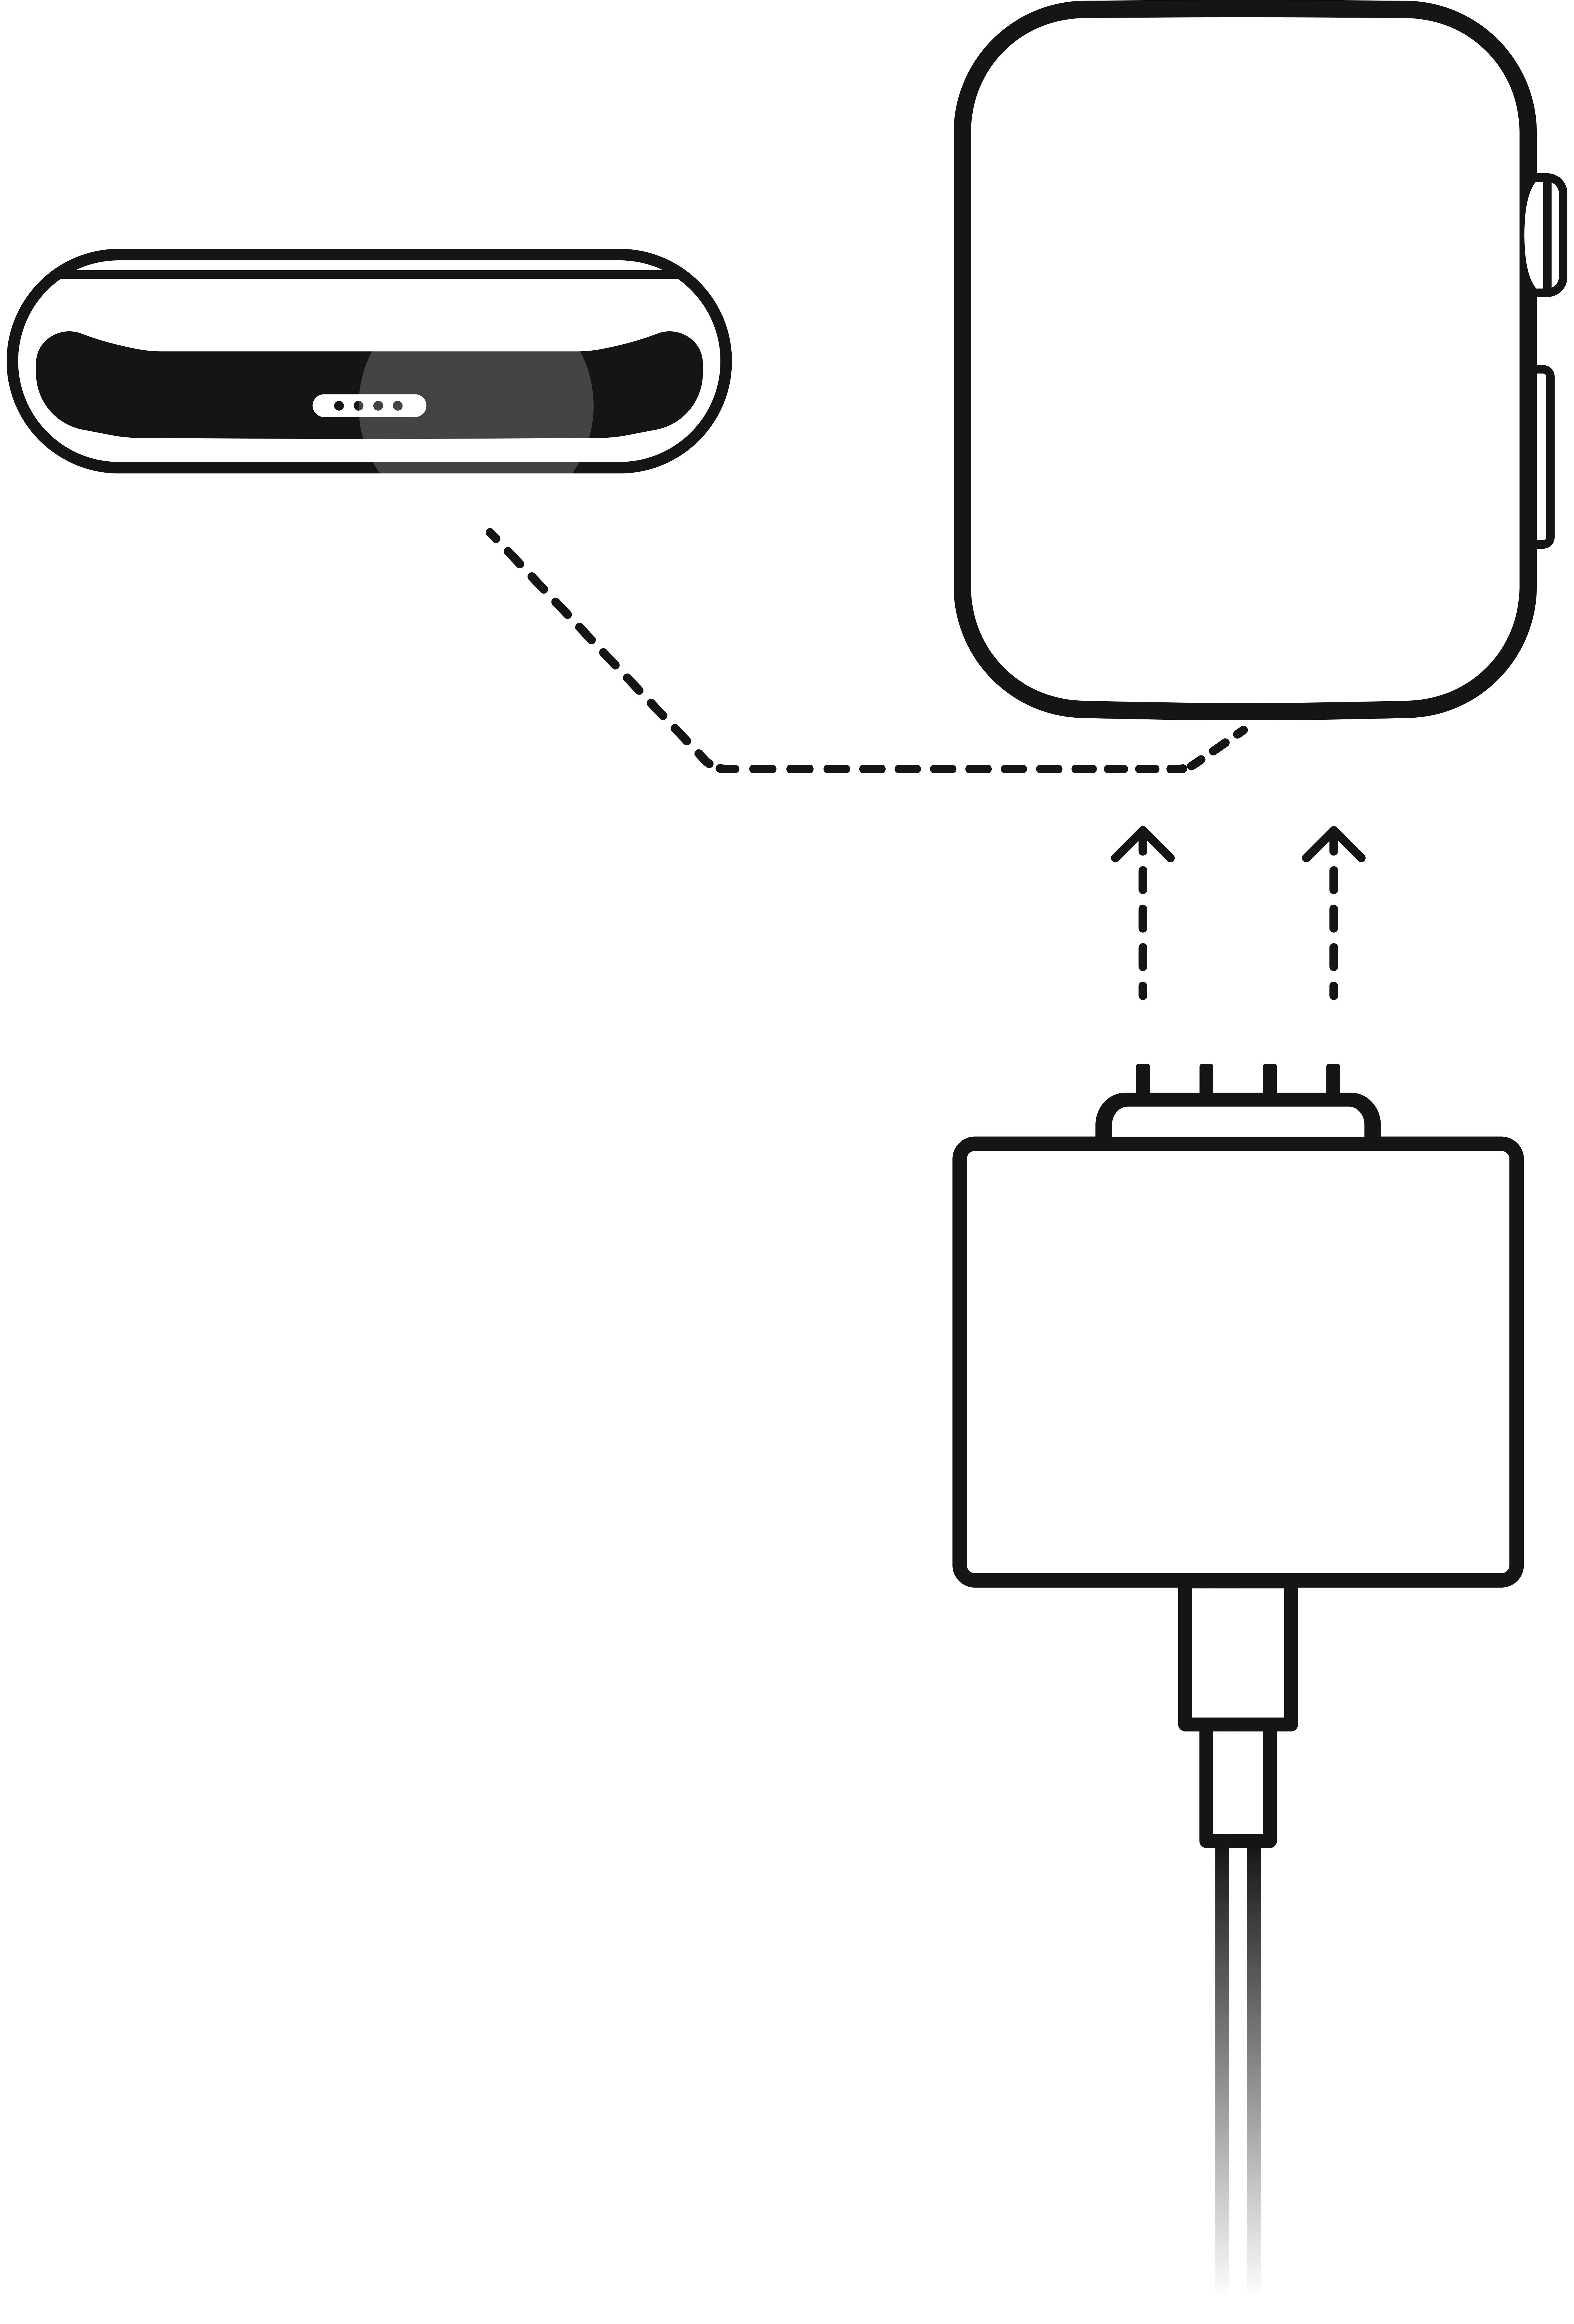 DFU Mode Step 1. Connect your Apple Watch via Data Cable adapter